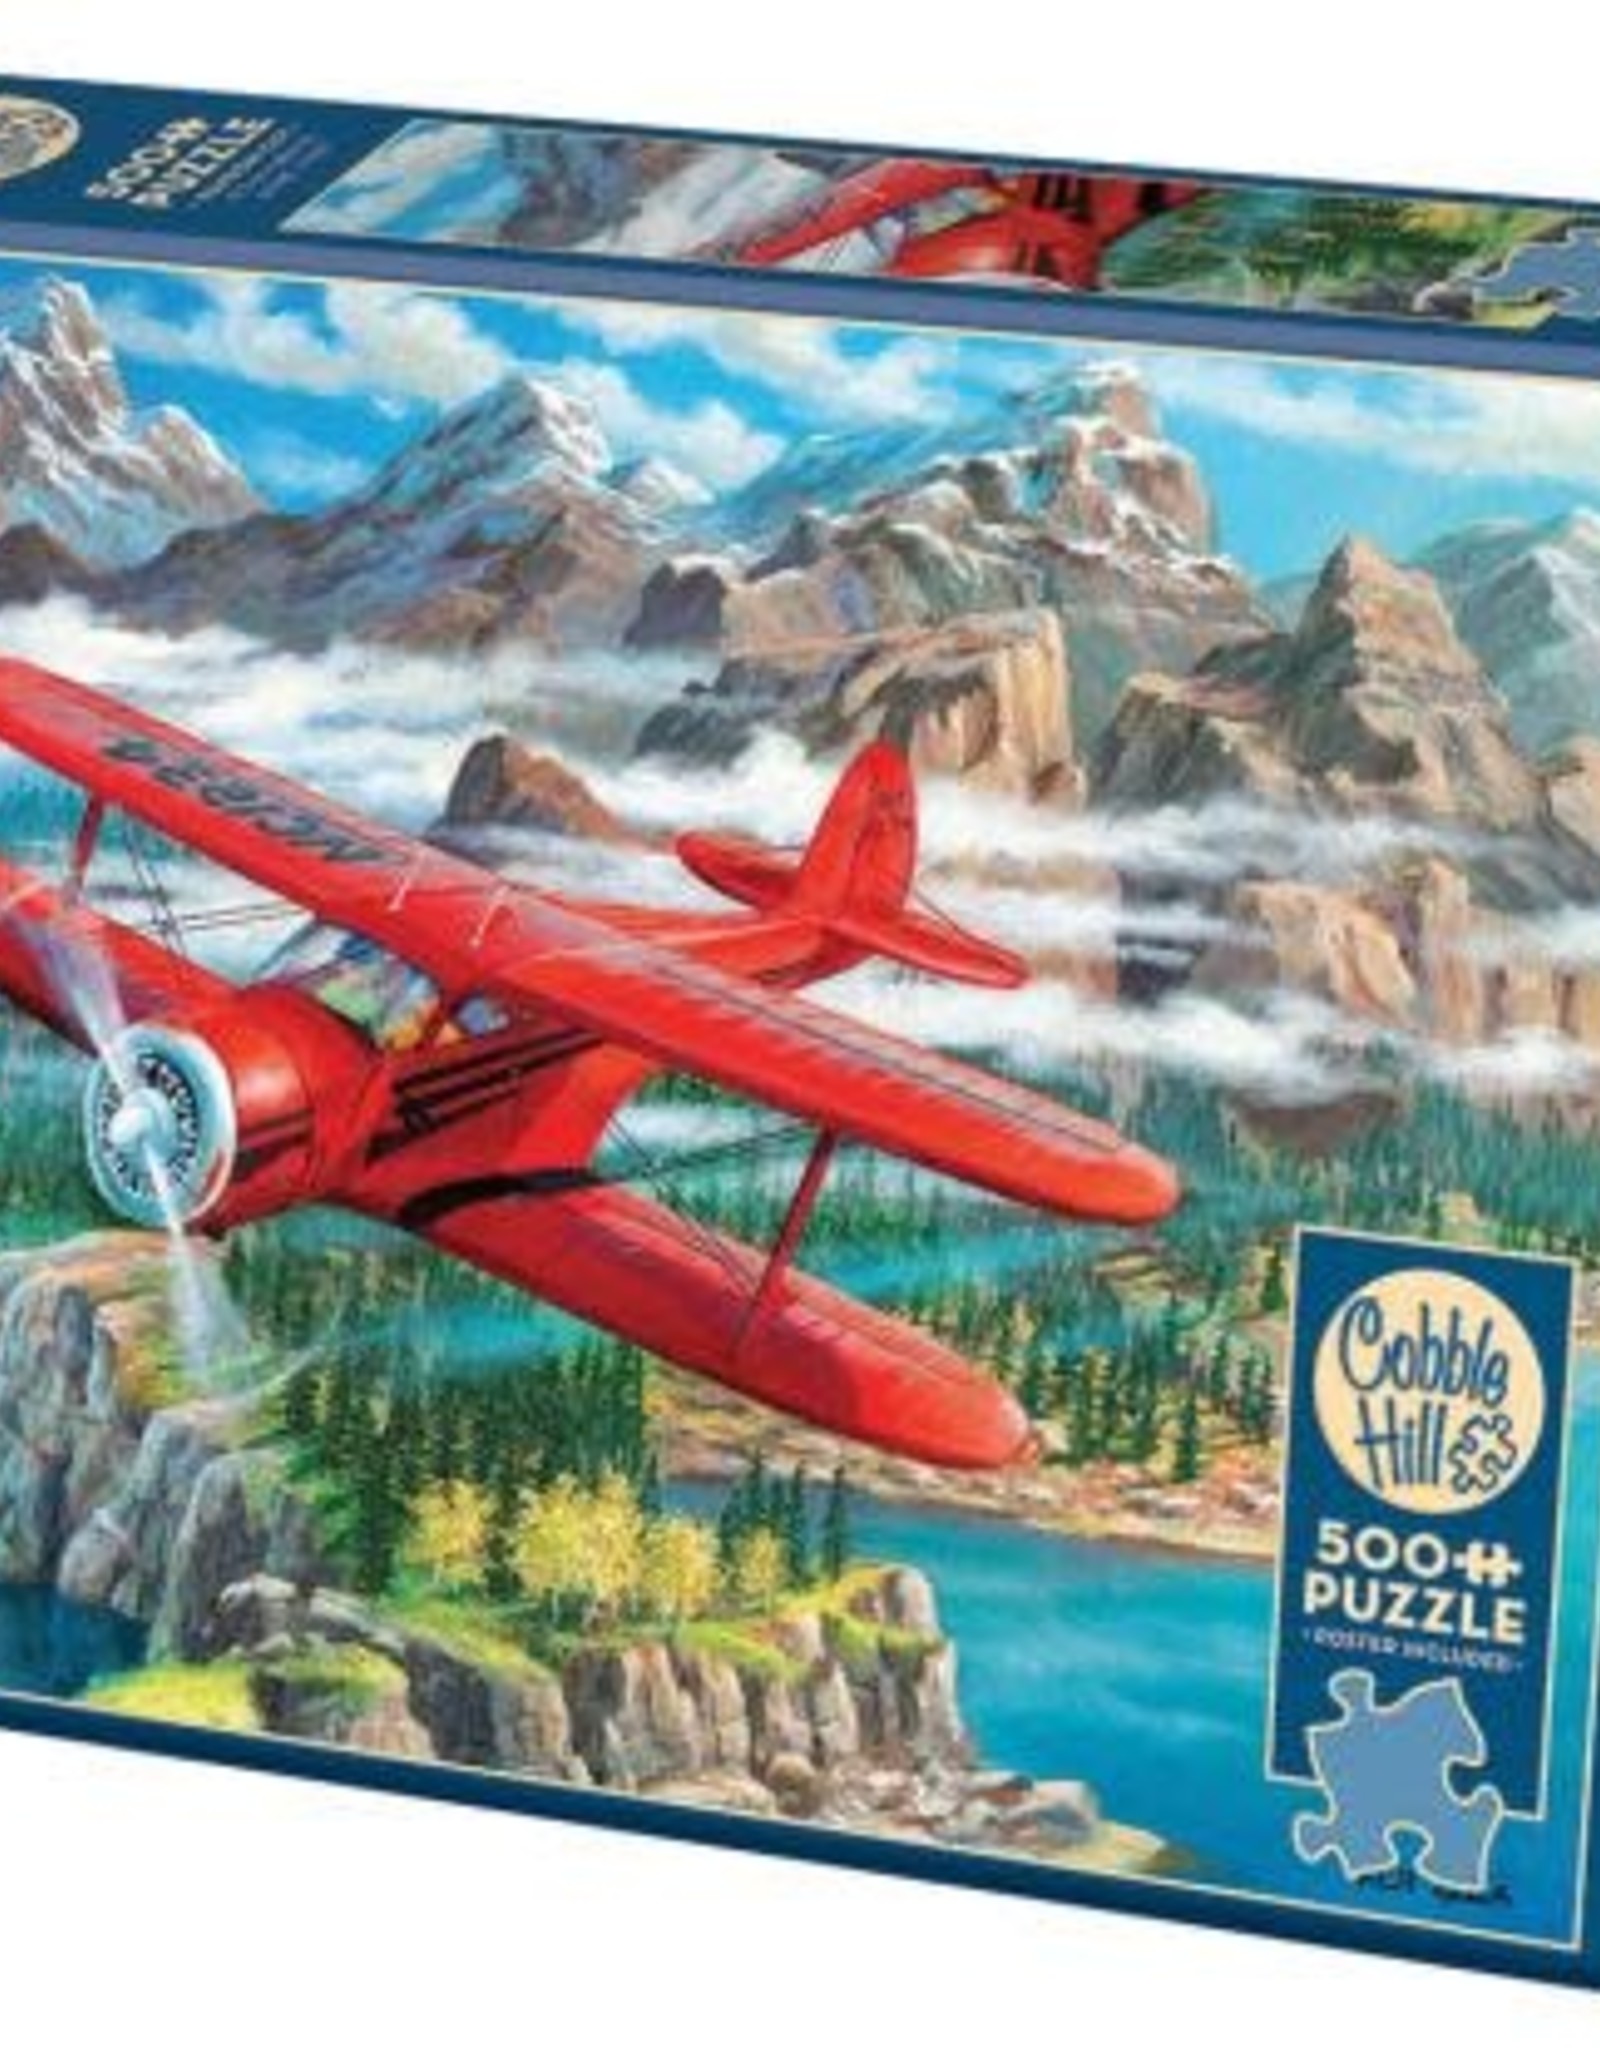 Cobble Hill Puzzles OM85102  Beechcraft Staggerwing 500pc Cobble Hill Puzzle